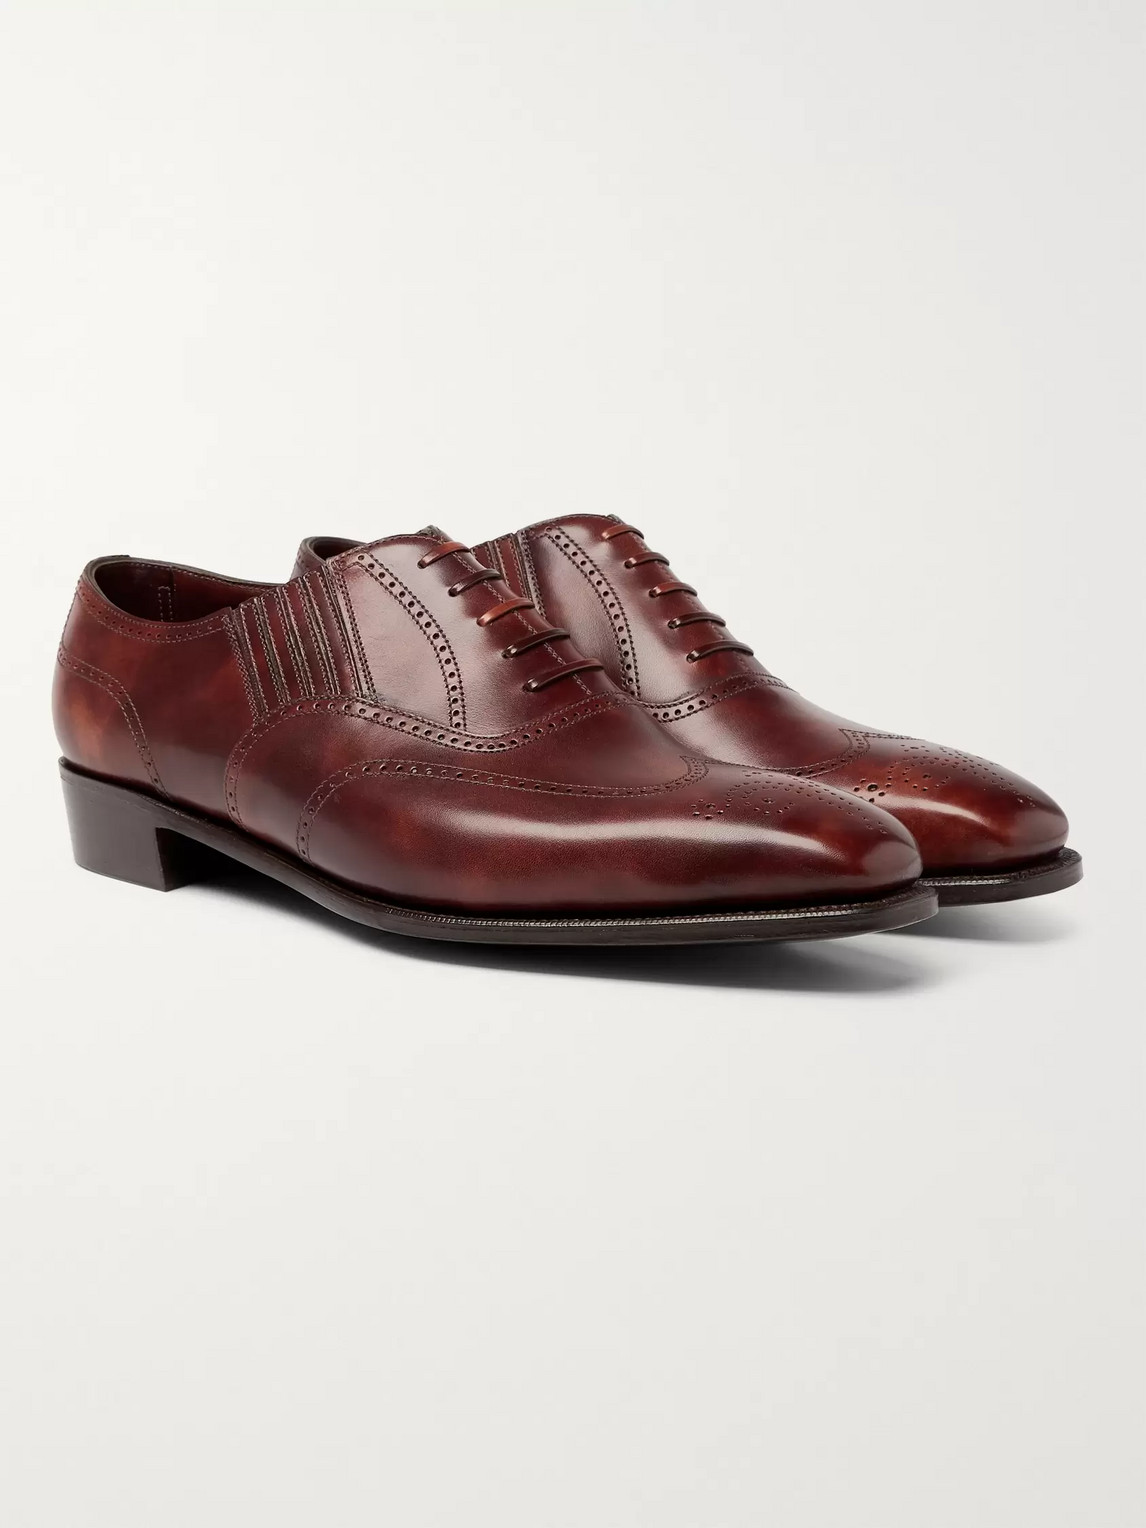 George Cleverley Anthony Churchill Leather Oxford Brogues In Brown